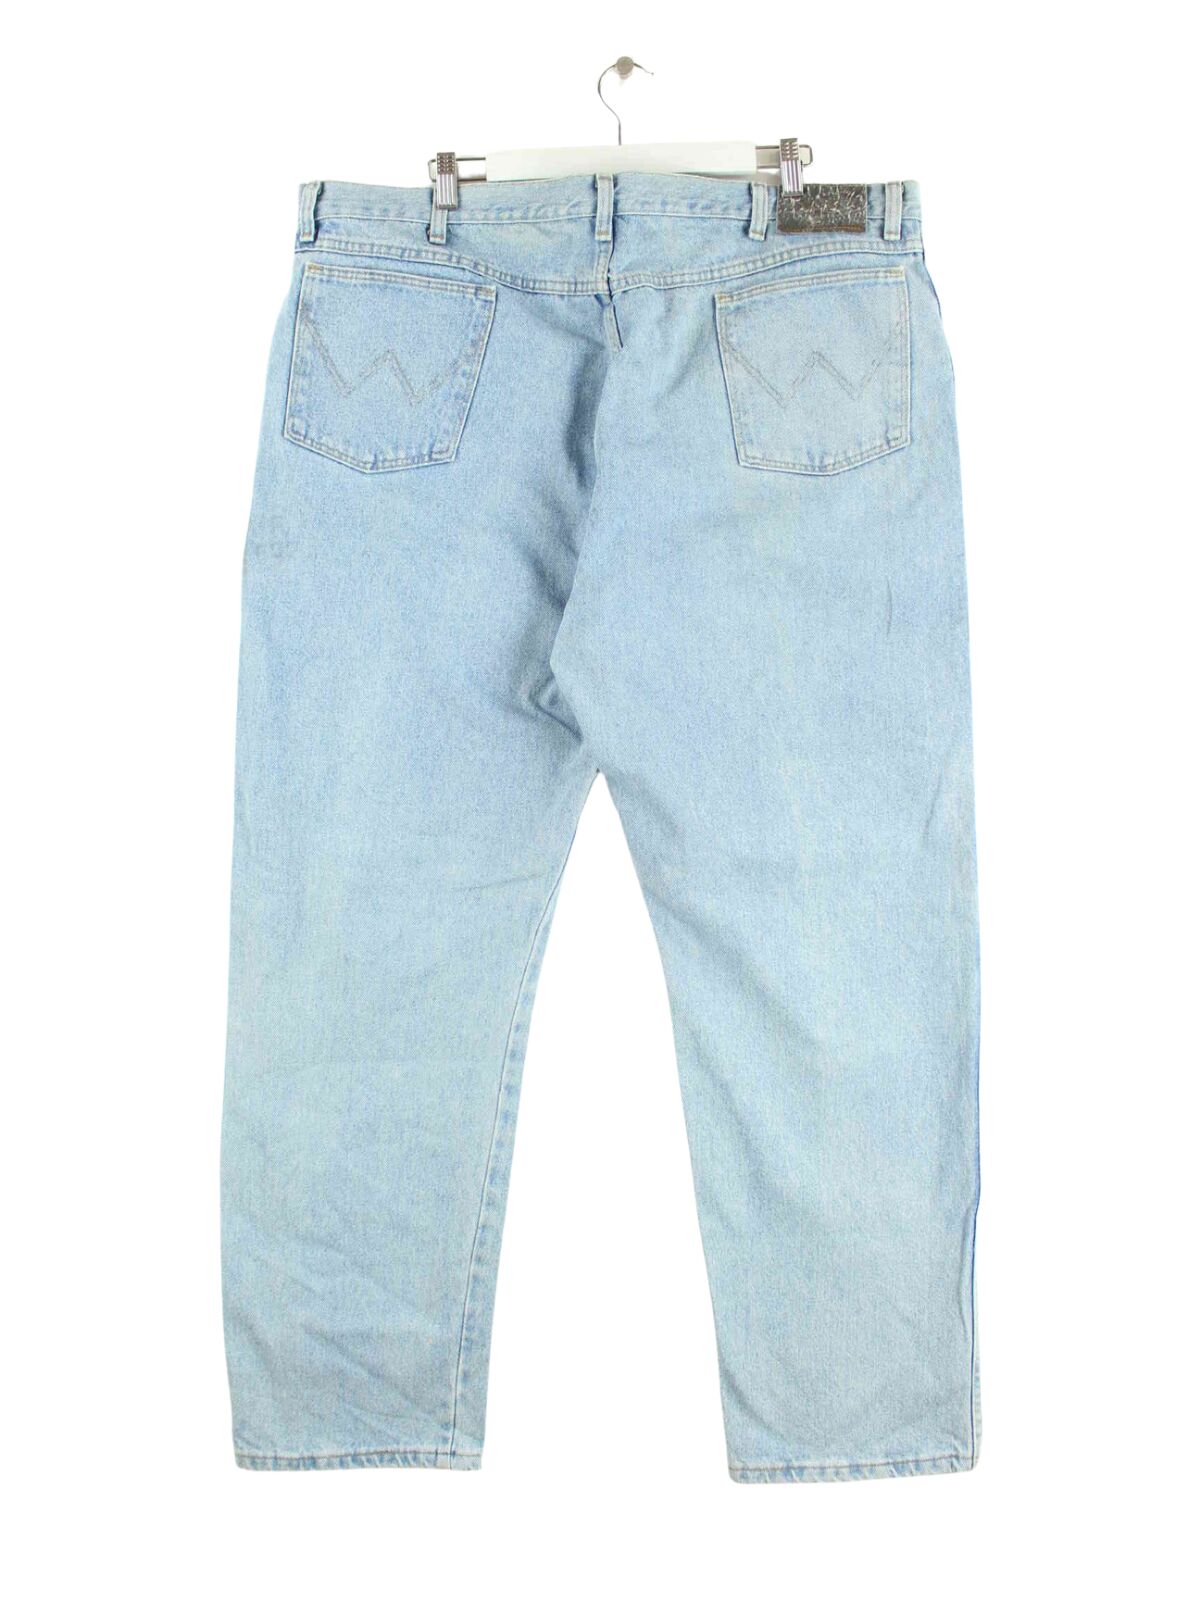 Wrangler Relaxed Fit Jeans Blau W44 L32 (back image)